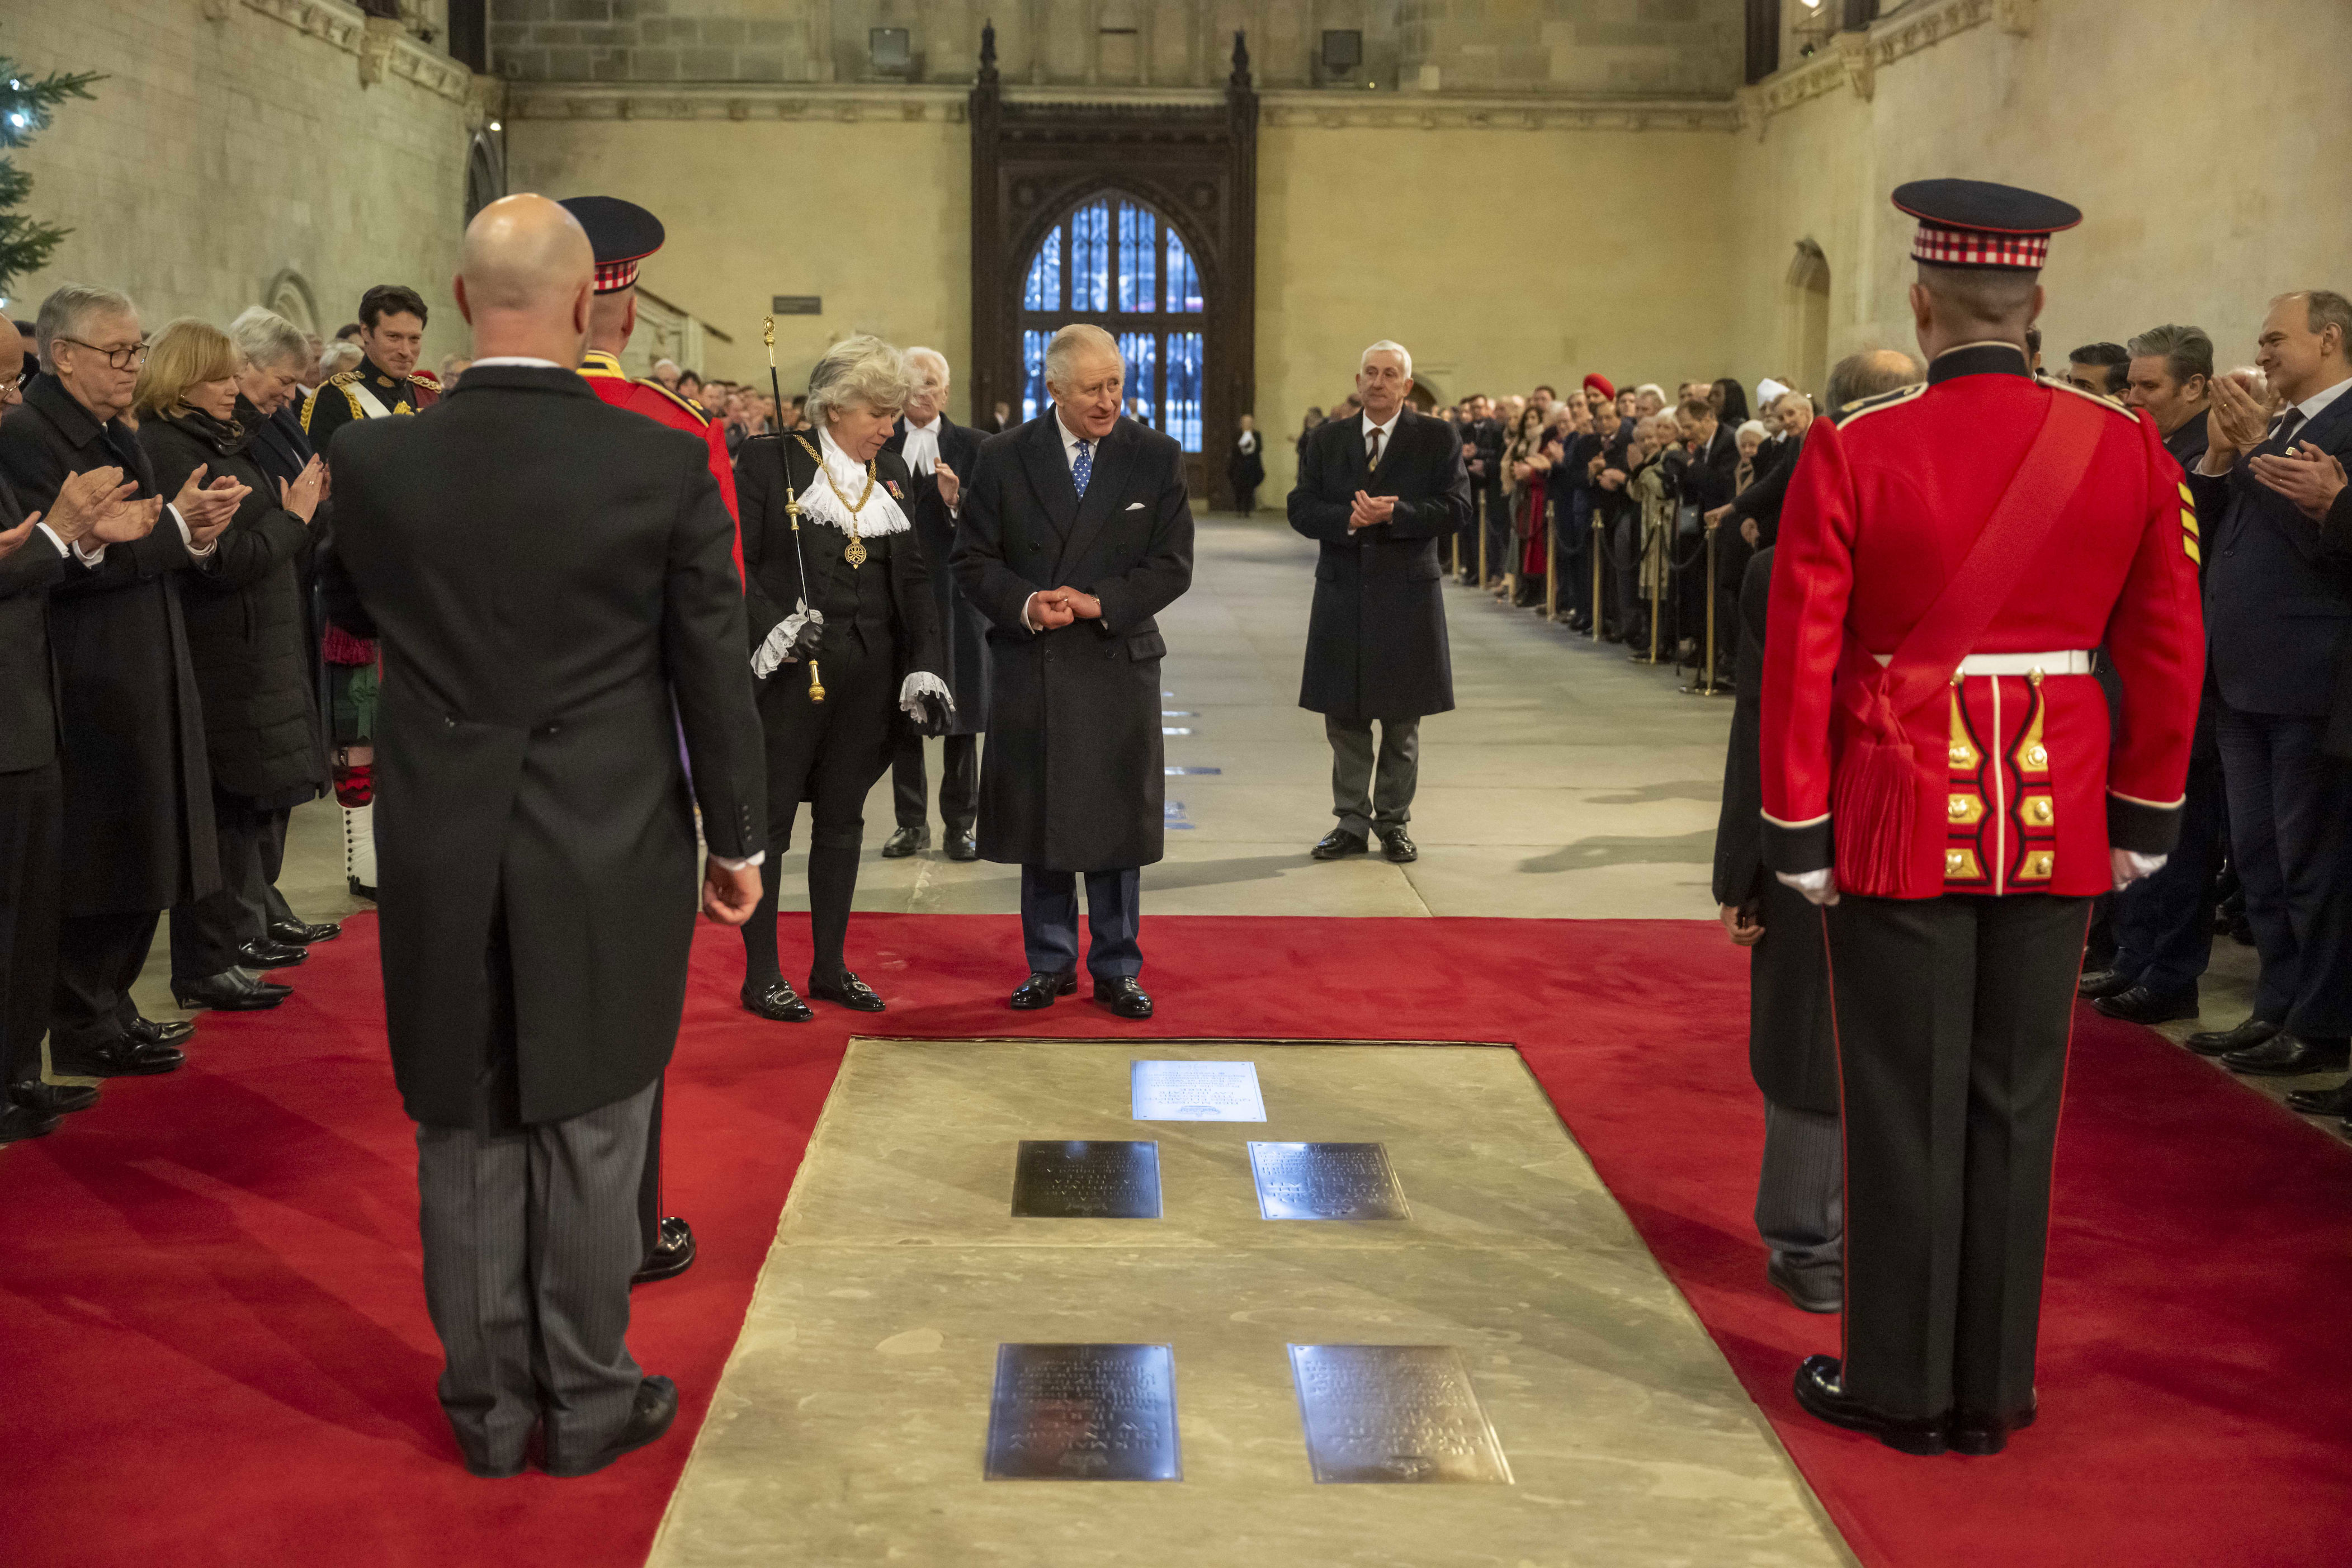 <p>King Charles III visited the Houses of Parliament in London to see a new plaque commemorating his mother, Queen Elizabeth II, lying in state in Westminster Hall ahead of her September funeral and to to unveil Jubilee Gifts on Dec. 14, 2022. Keep reading for a close-up look...</p>